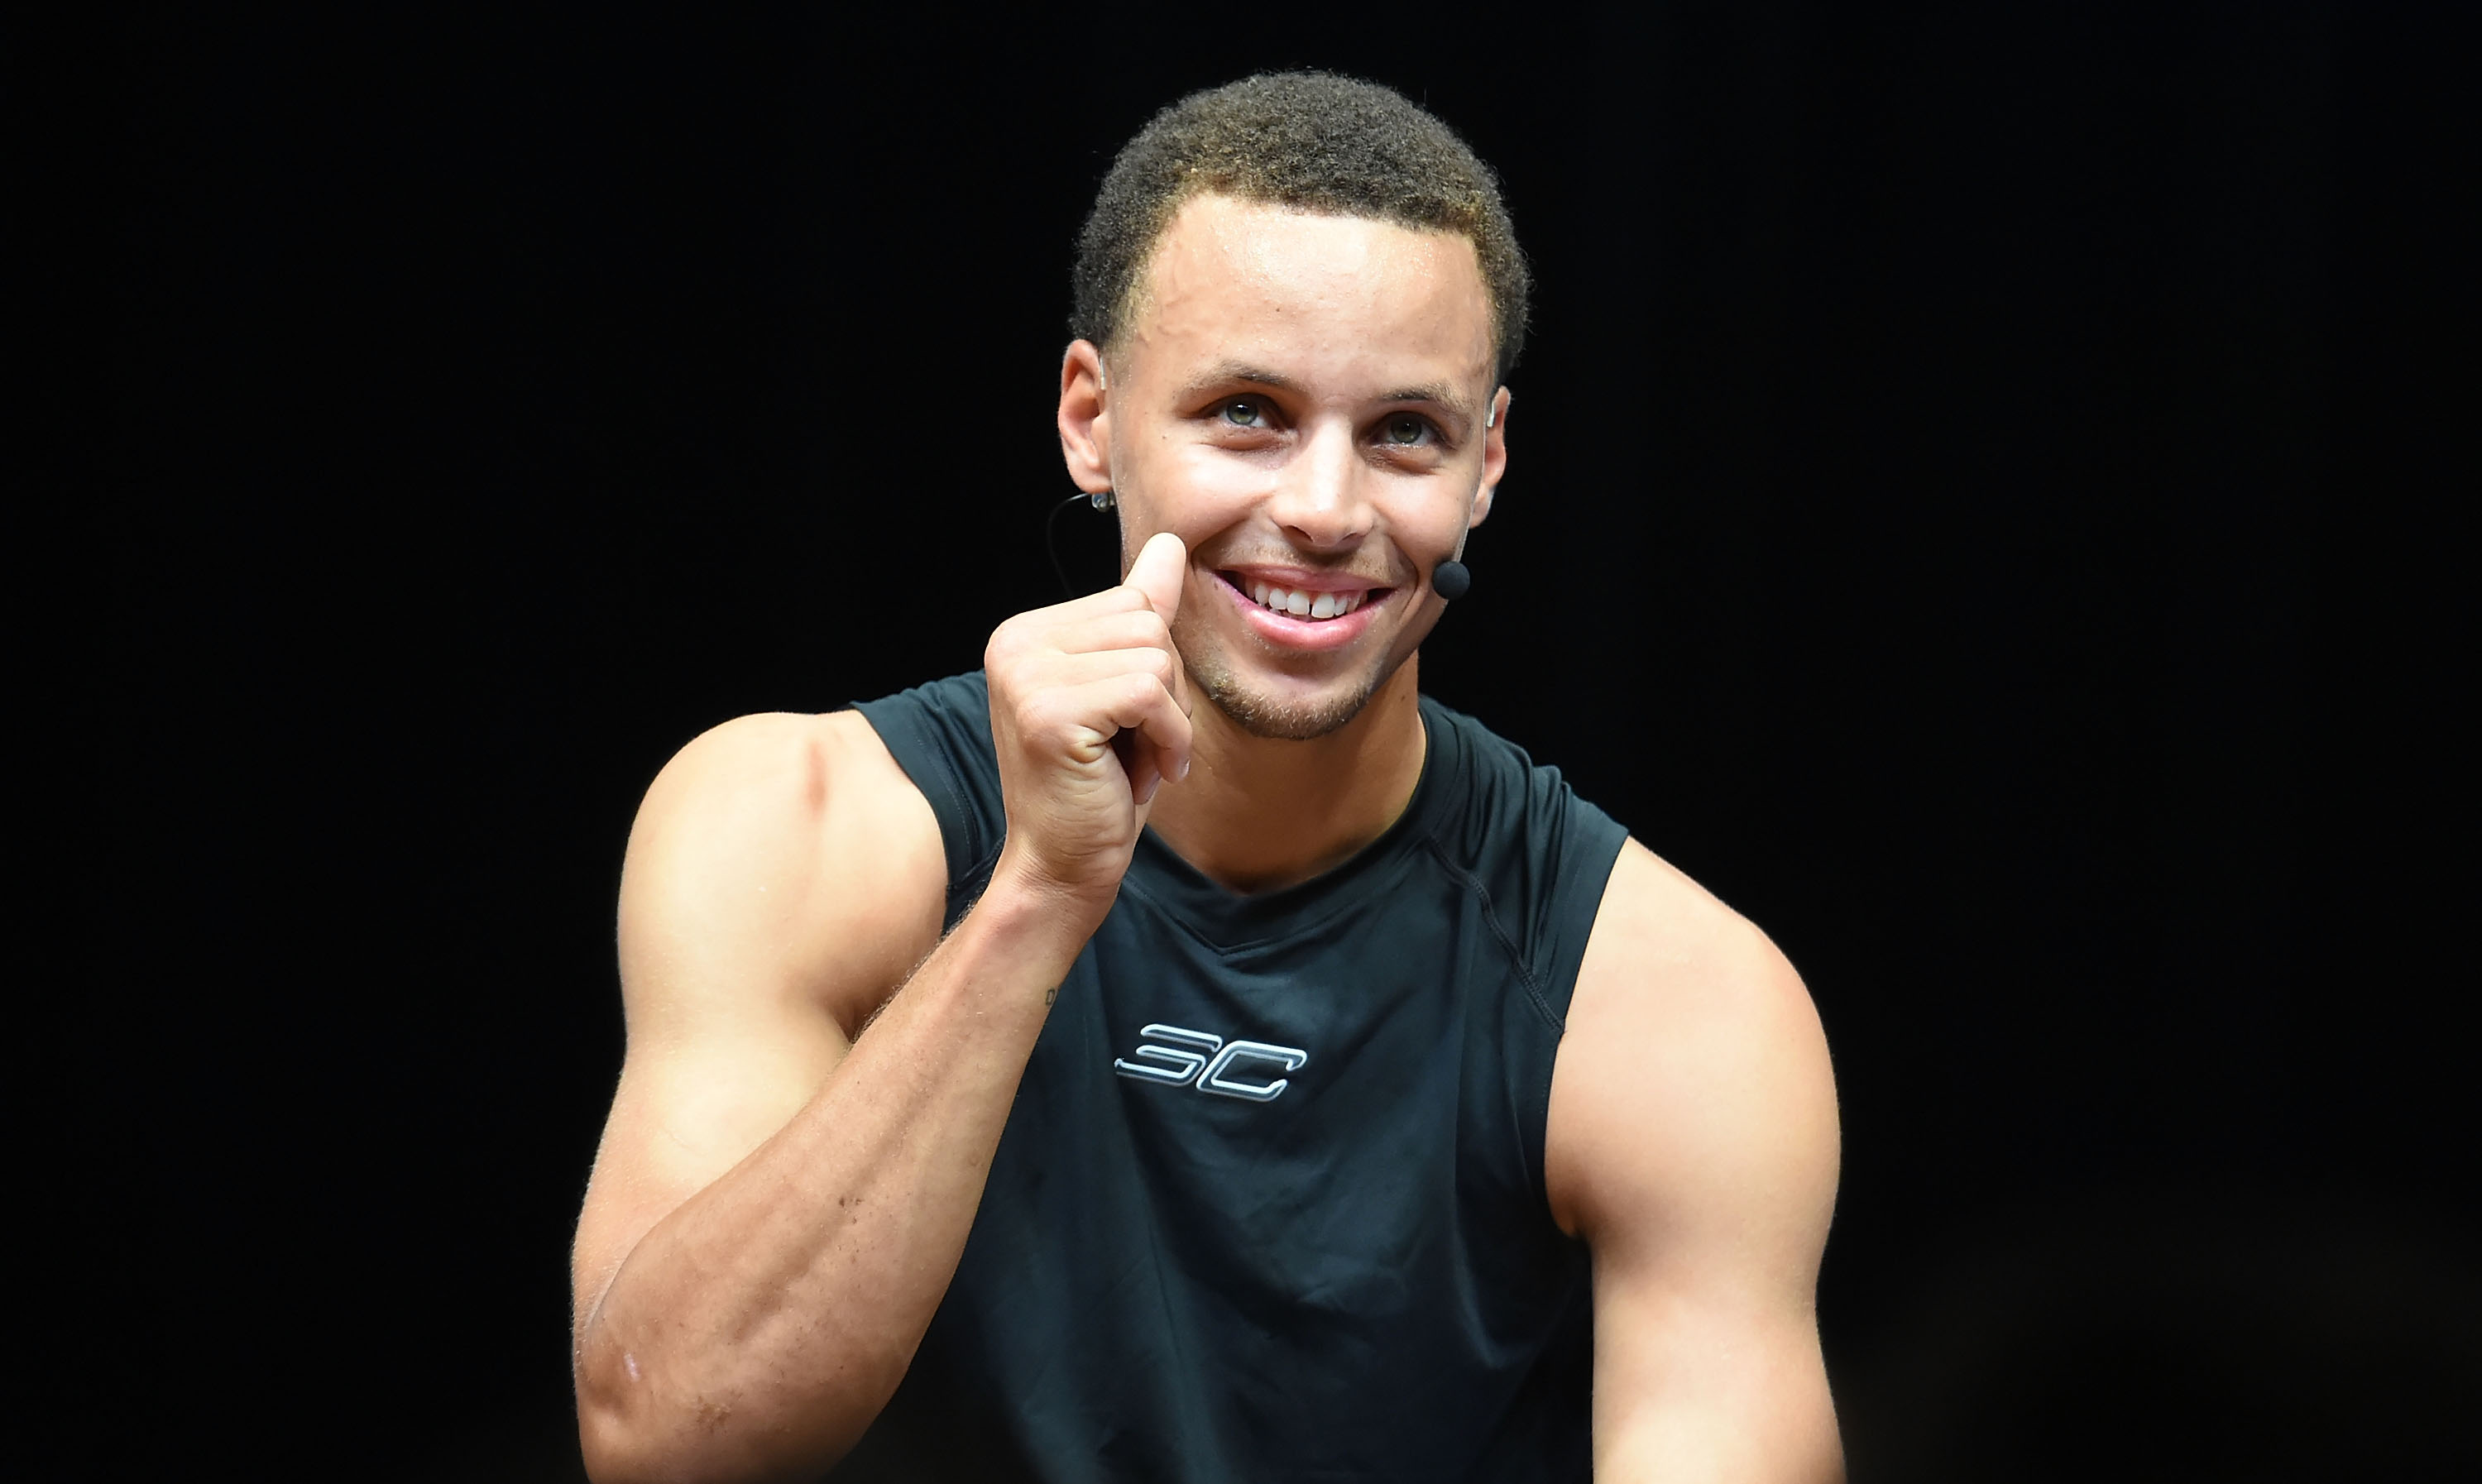 Stephen Curry in Tokyo, Japan on Sept. 4, 2015. (Jun Sato—Getty Images)